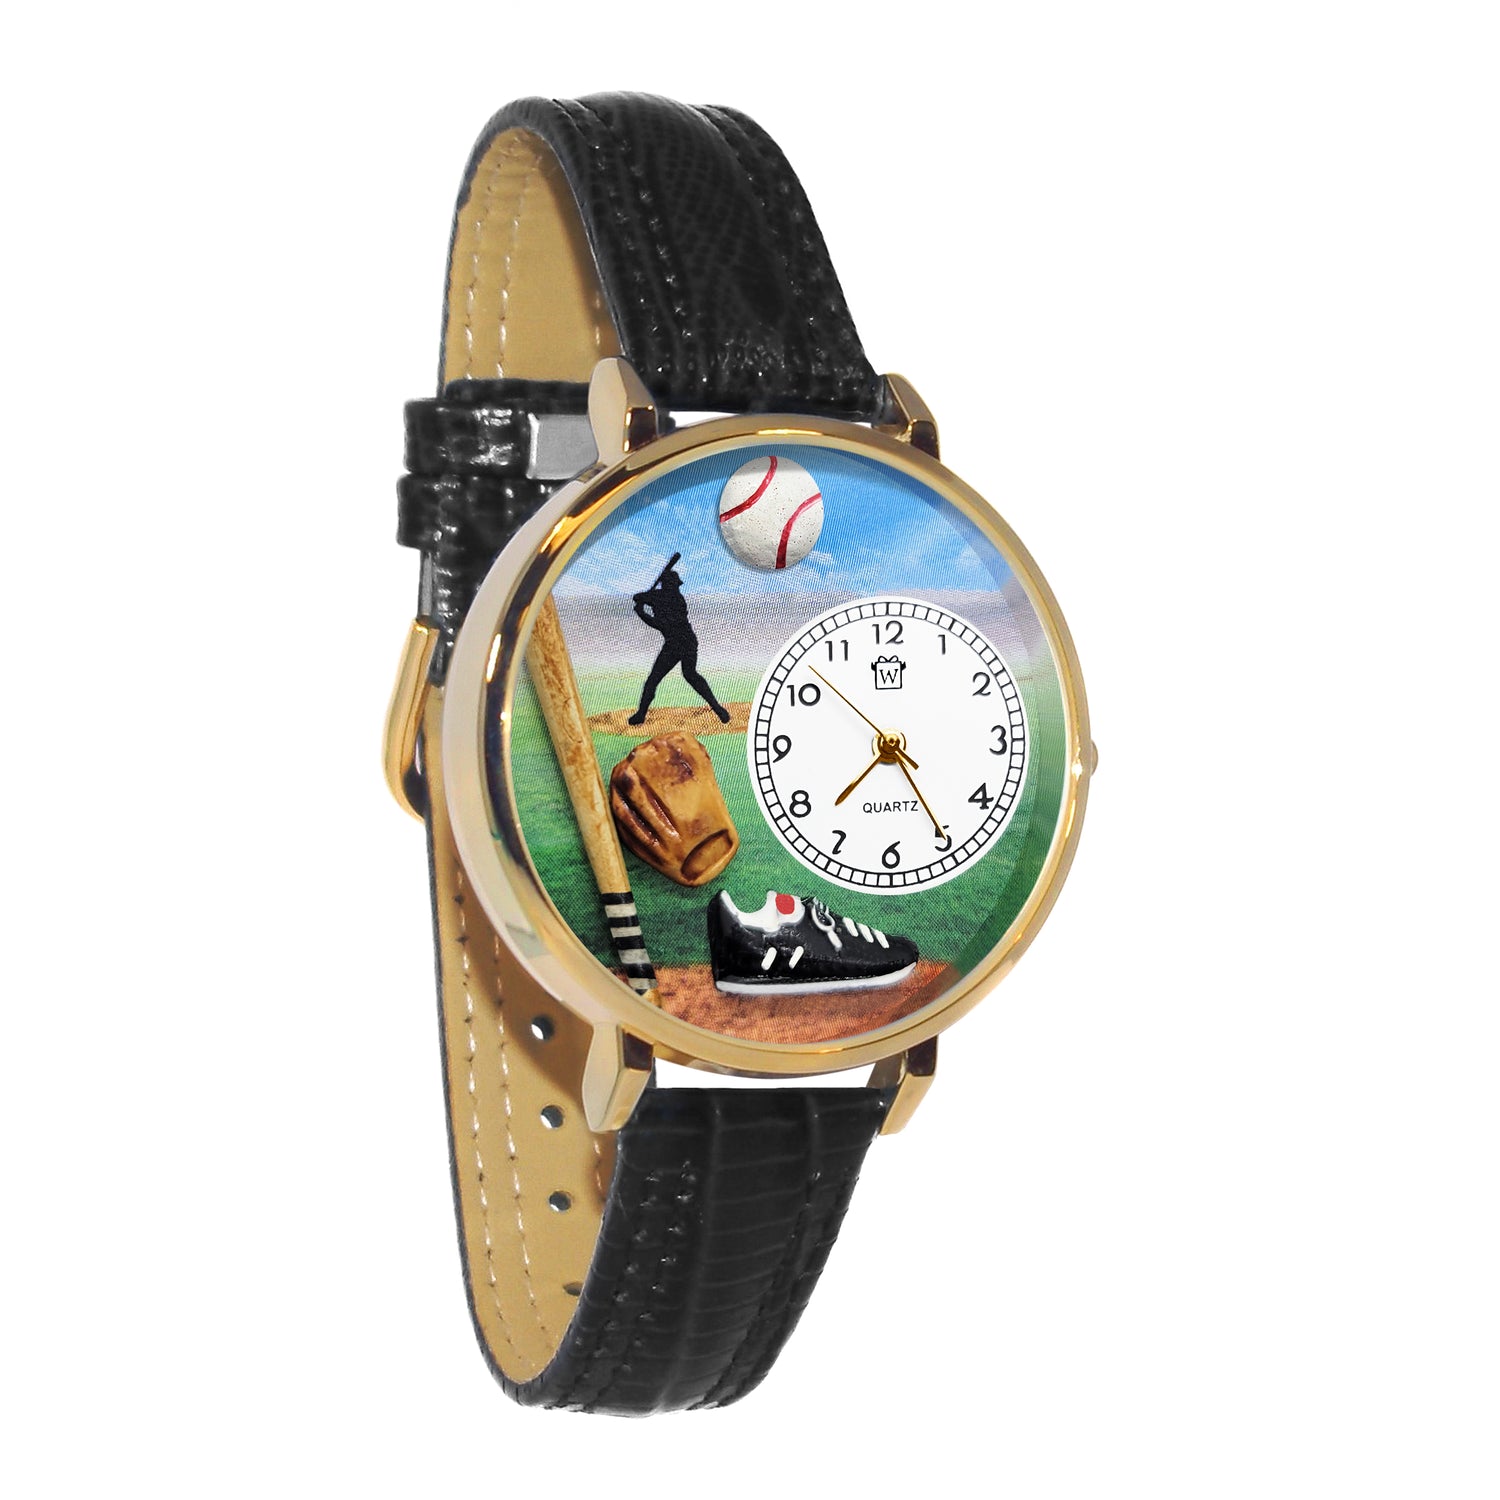 Whimsical Gifts | Baseball 3D Watch Large Style | Handmade in USA | Hobbies & Special Interests | Sports | Novelty Unique Fun Miniatures Gift | Gold Finish Black Leather Watch Band